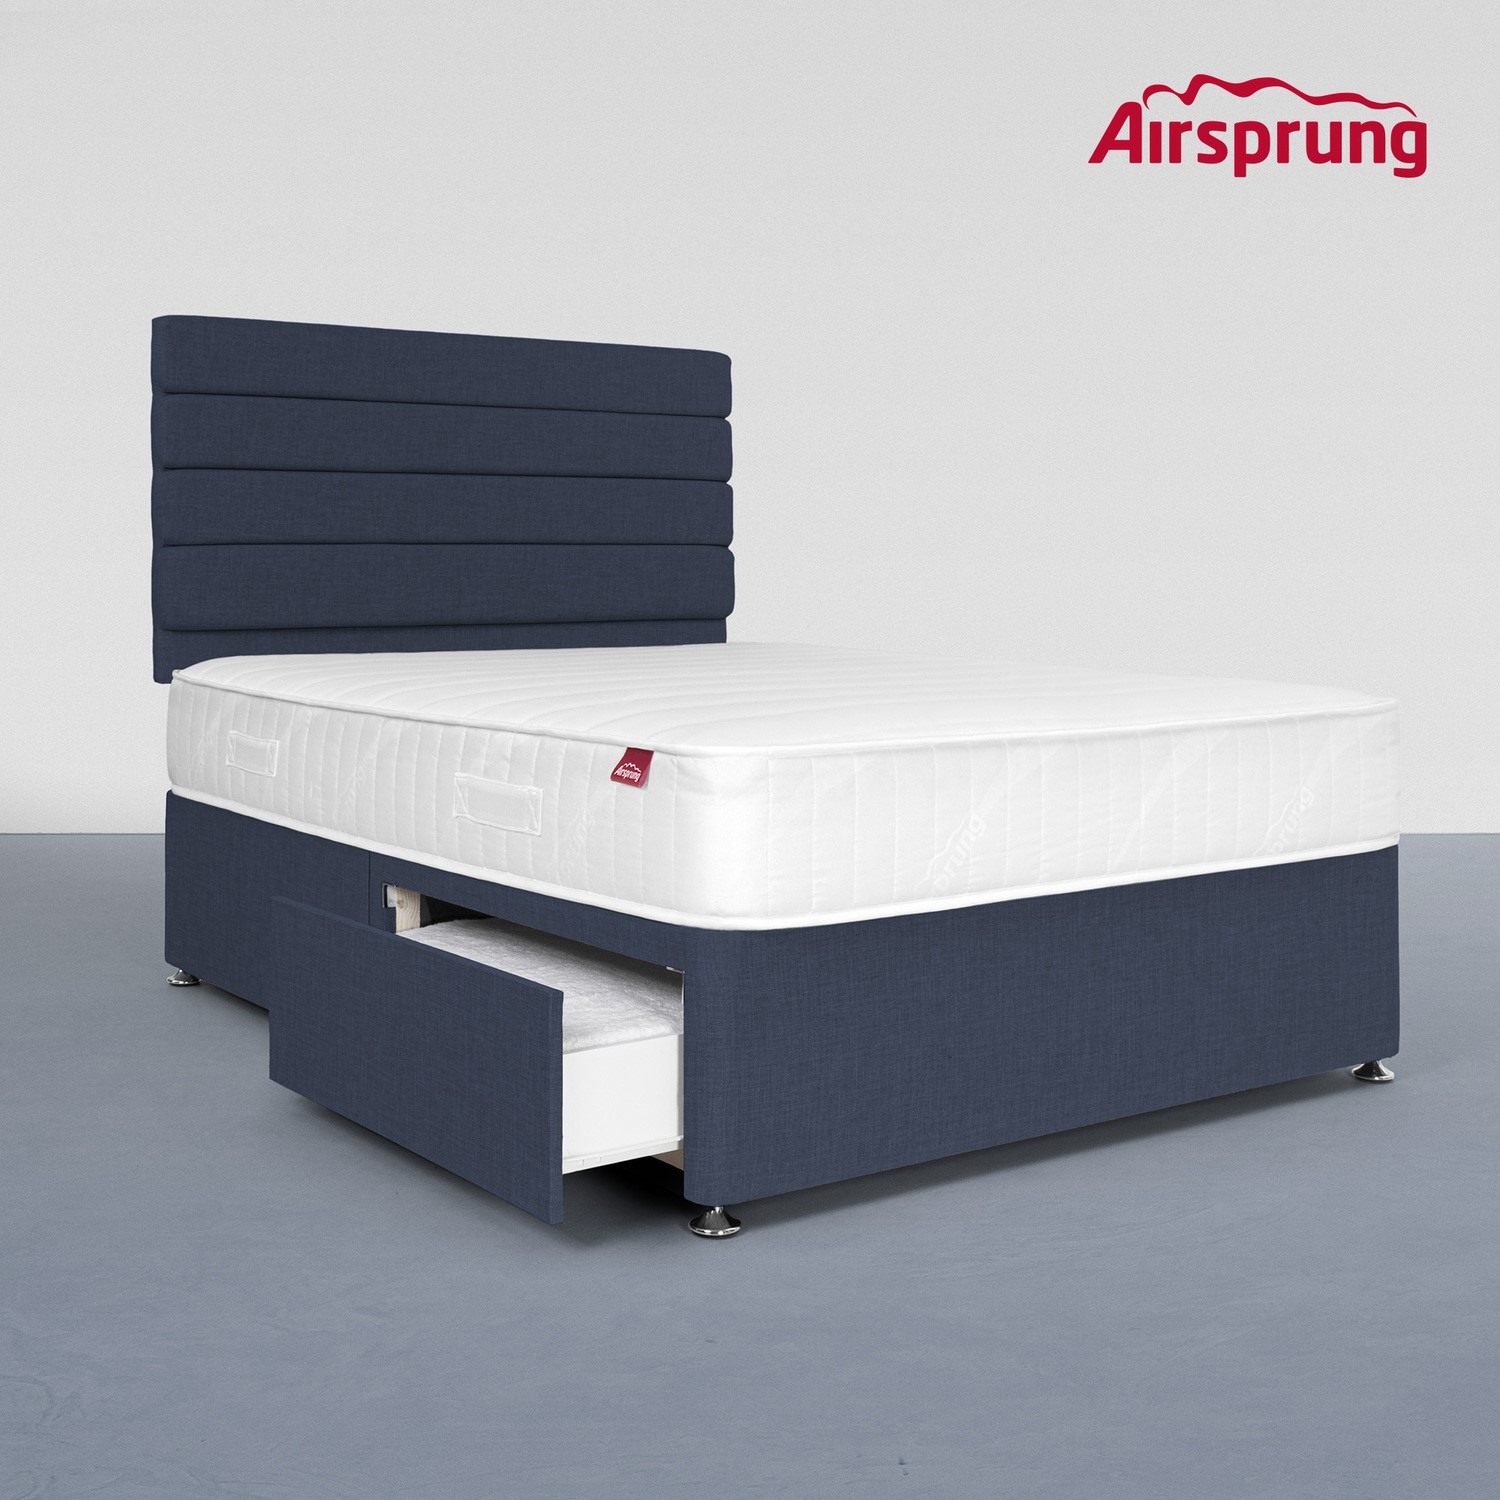 Read more about Airsprung small double 2 drawer divan bed with comfort mattress midnight blue